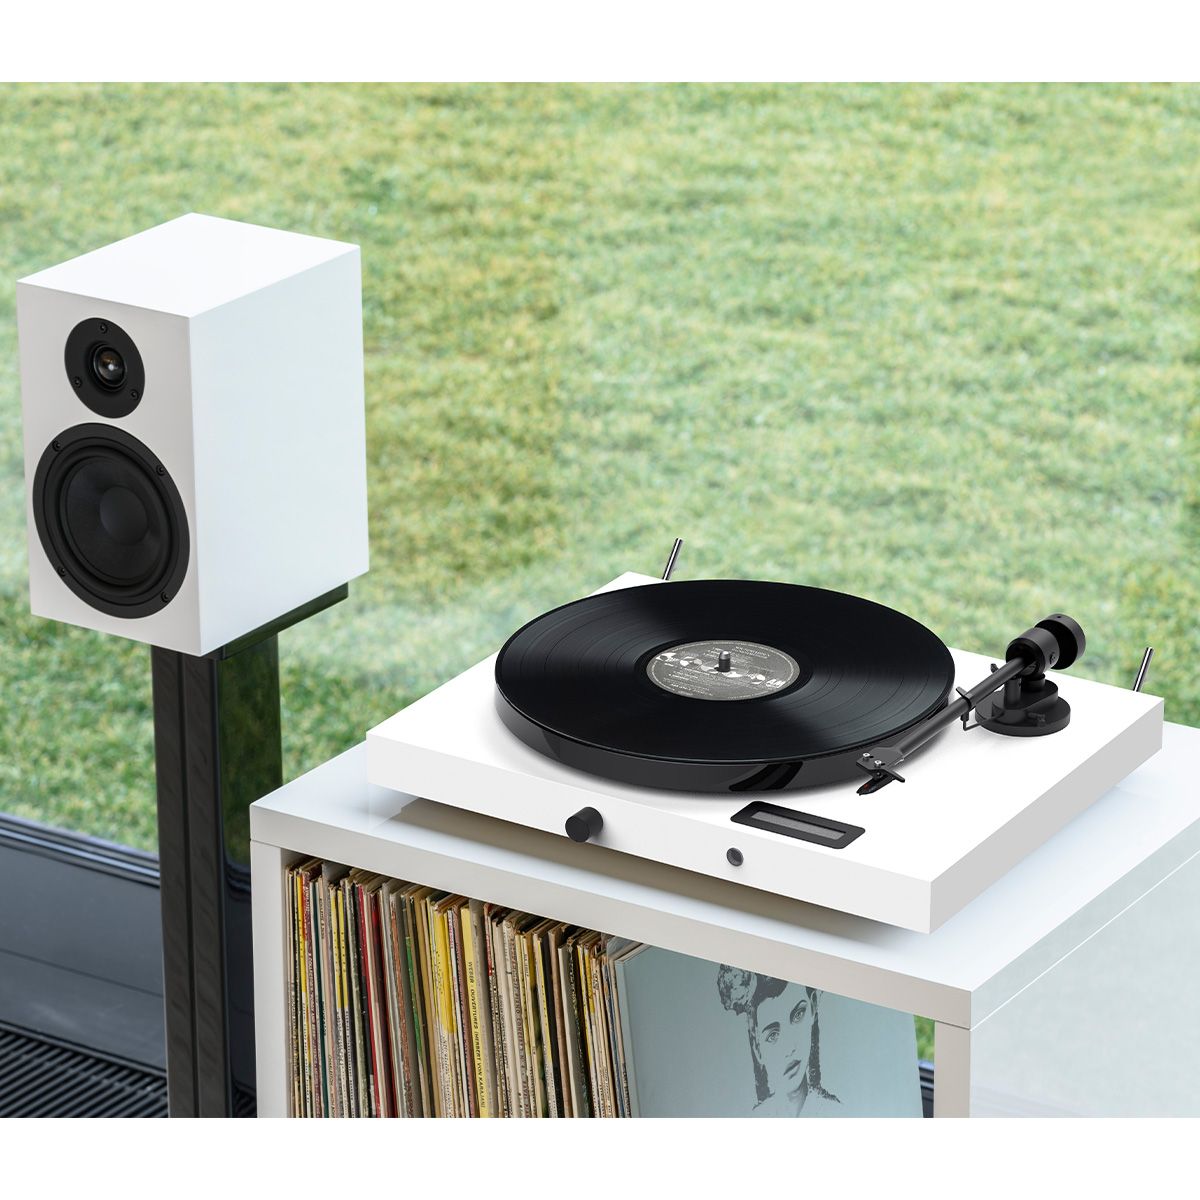 Pro-Ject Juke Box E1 Turntable in white on cabinet connected to speakers